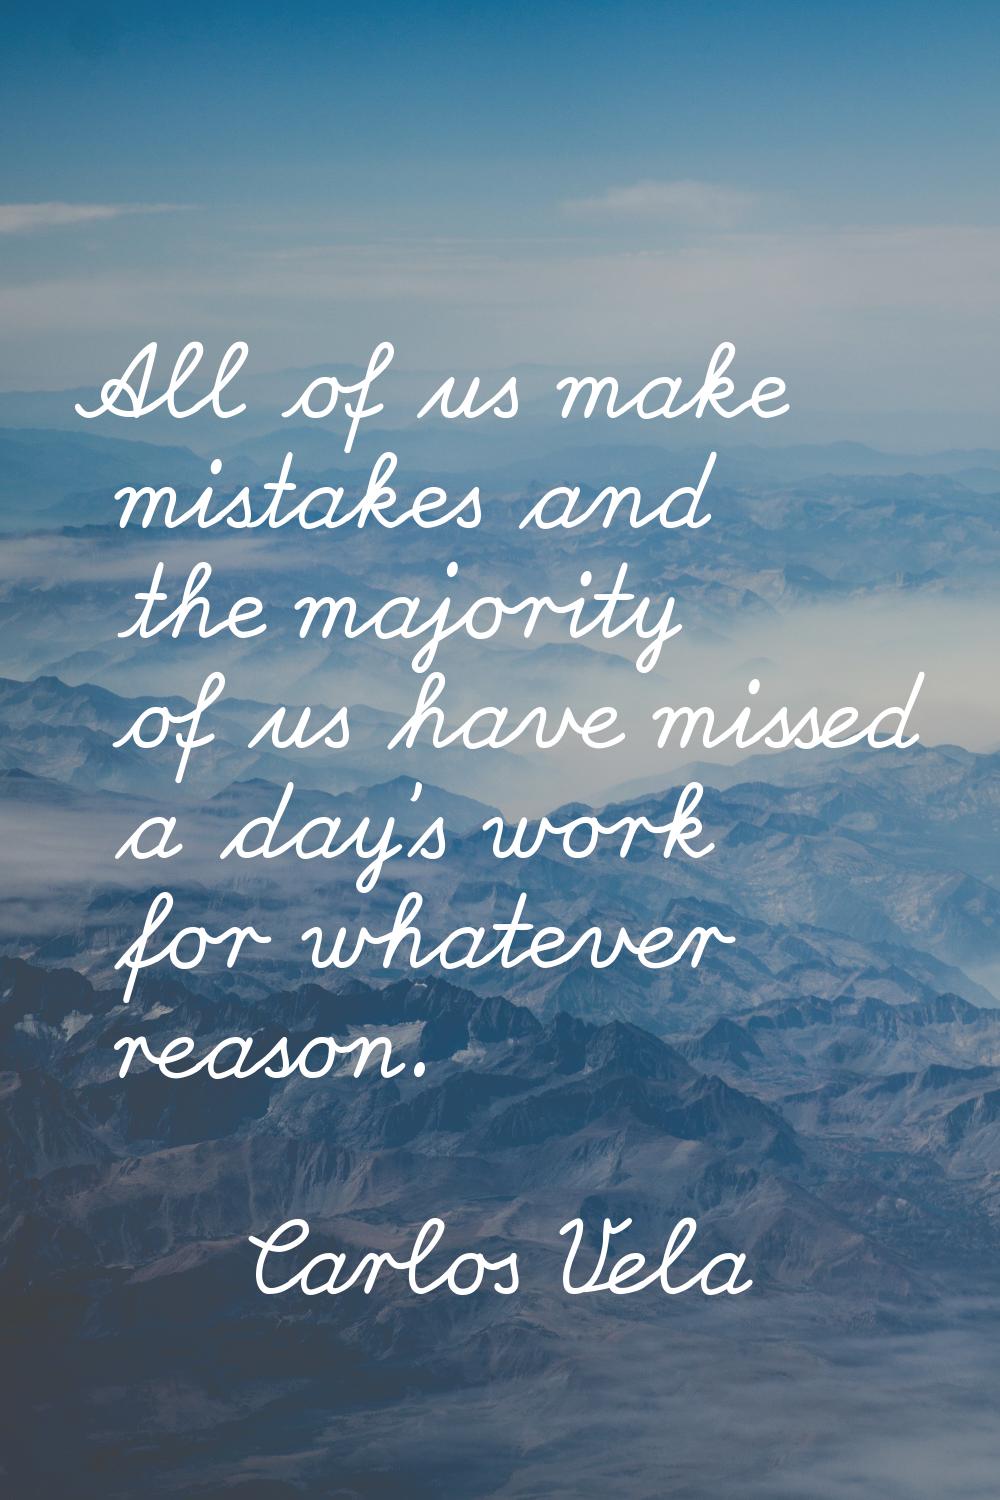 All of us make mistakes and the majority of us have missed a day's work for whatever reason.